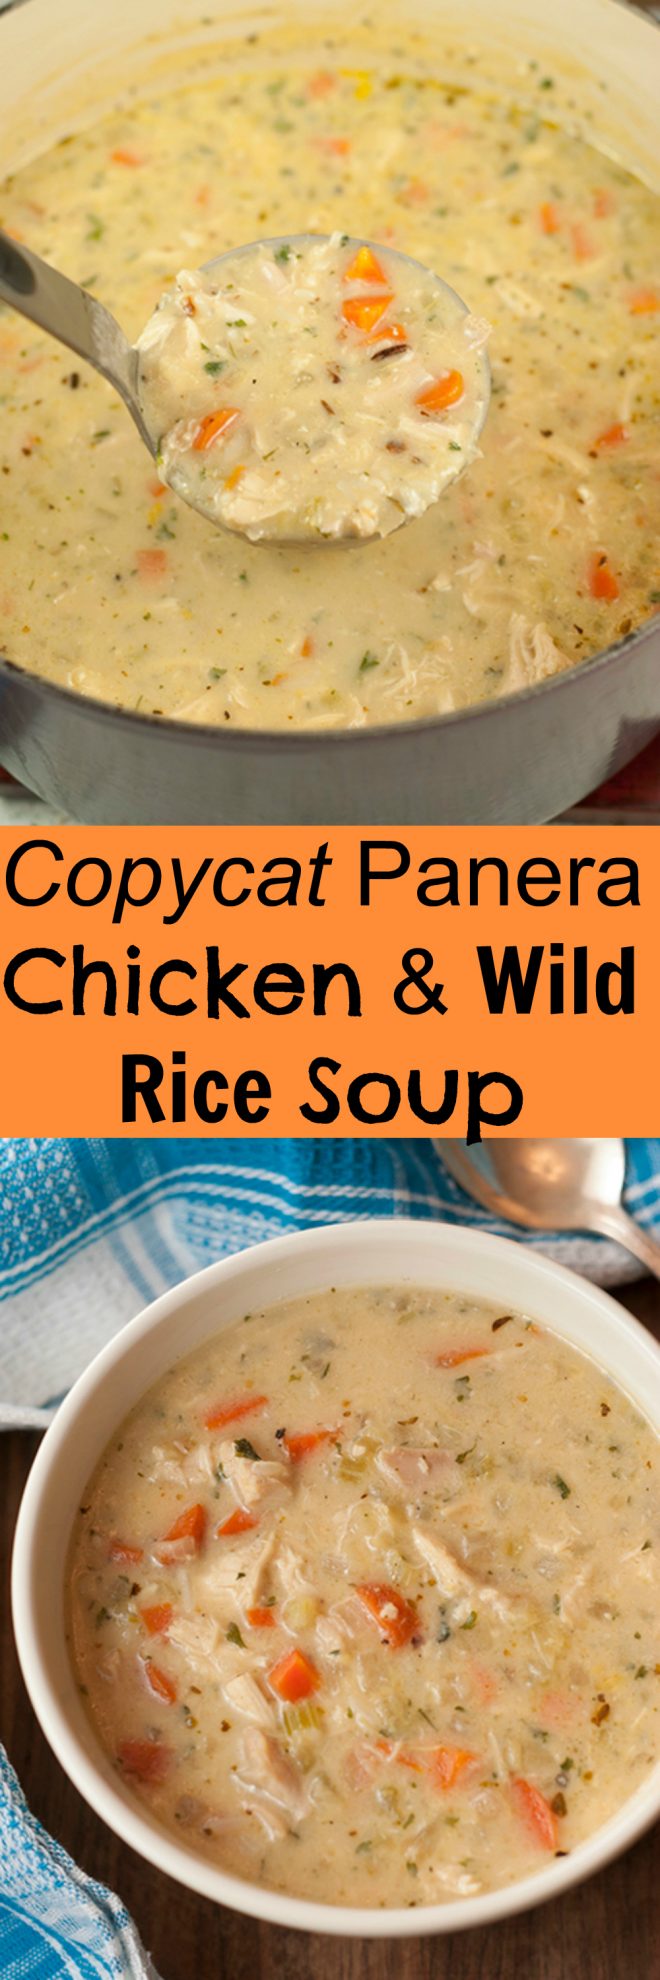 Copycat Panera Chicken & Wild Rice Soup | Wishes and Dishes